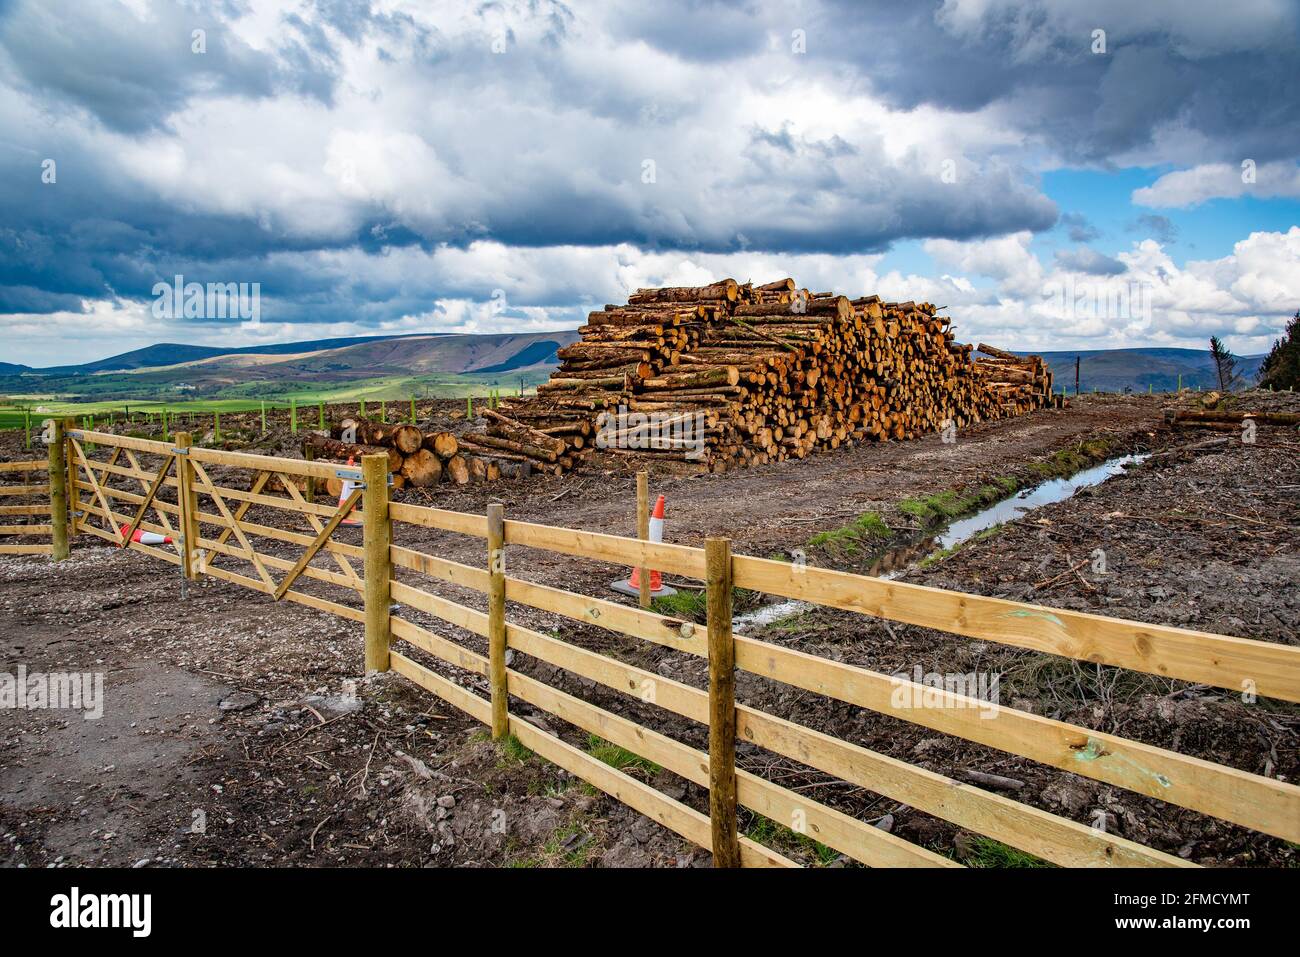 Stacks of forestry logs ready for collection, Cow Ark, Clitheroe, Lancashire, UK. Stock Photo